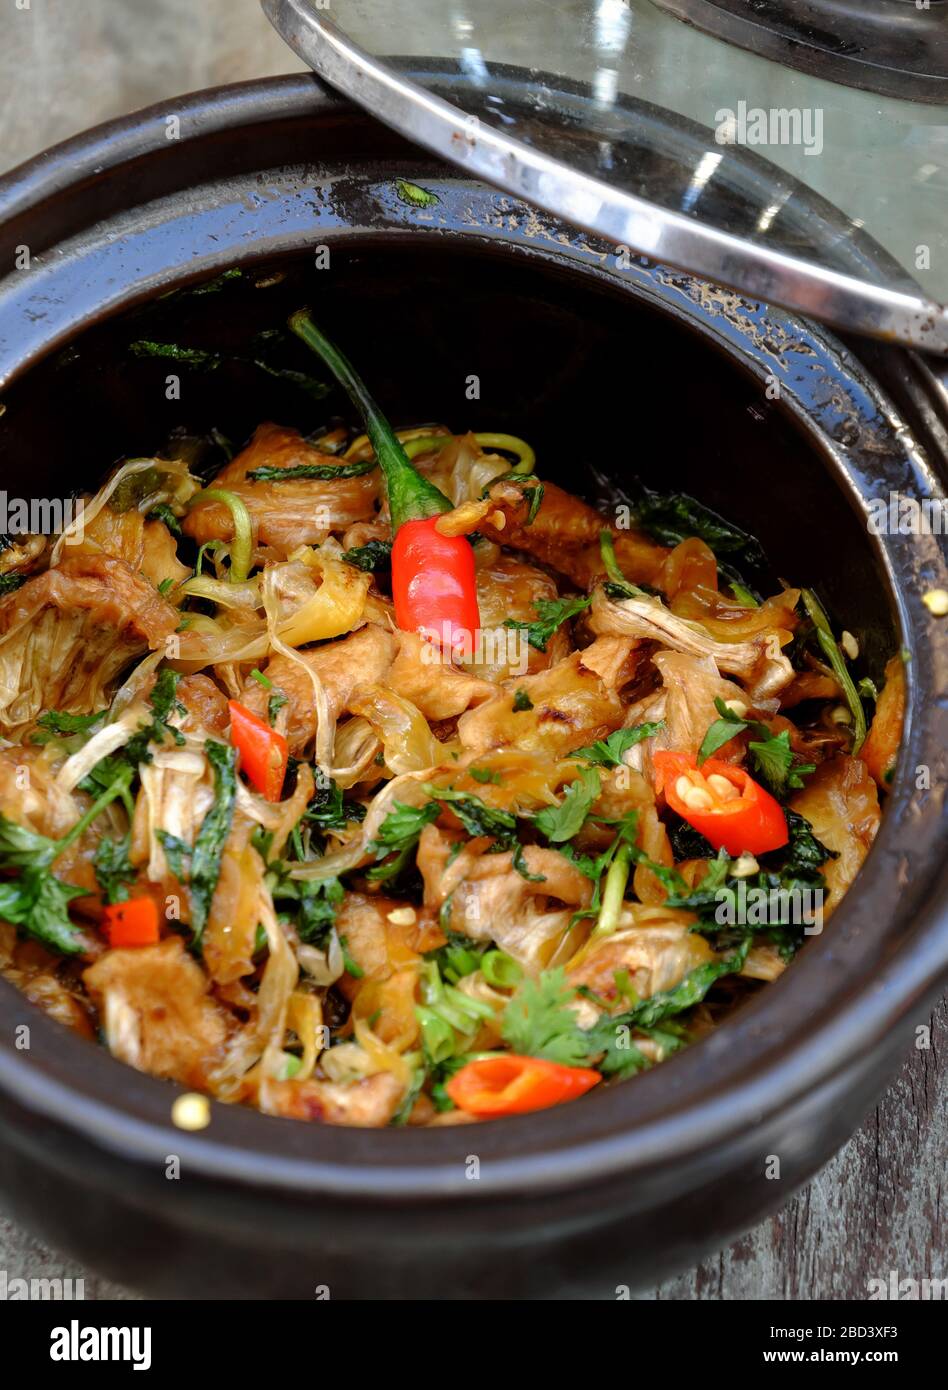 homemade Vietnamese vegan food for daily meal,edible fibre of breadfruit cook dried with sauce, laksa leaves, delicious vegetarian dish from jackfruit Stock Photo